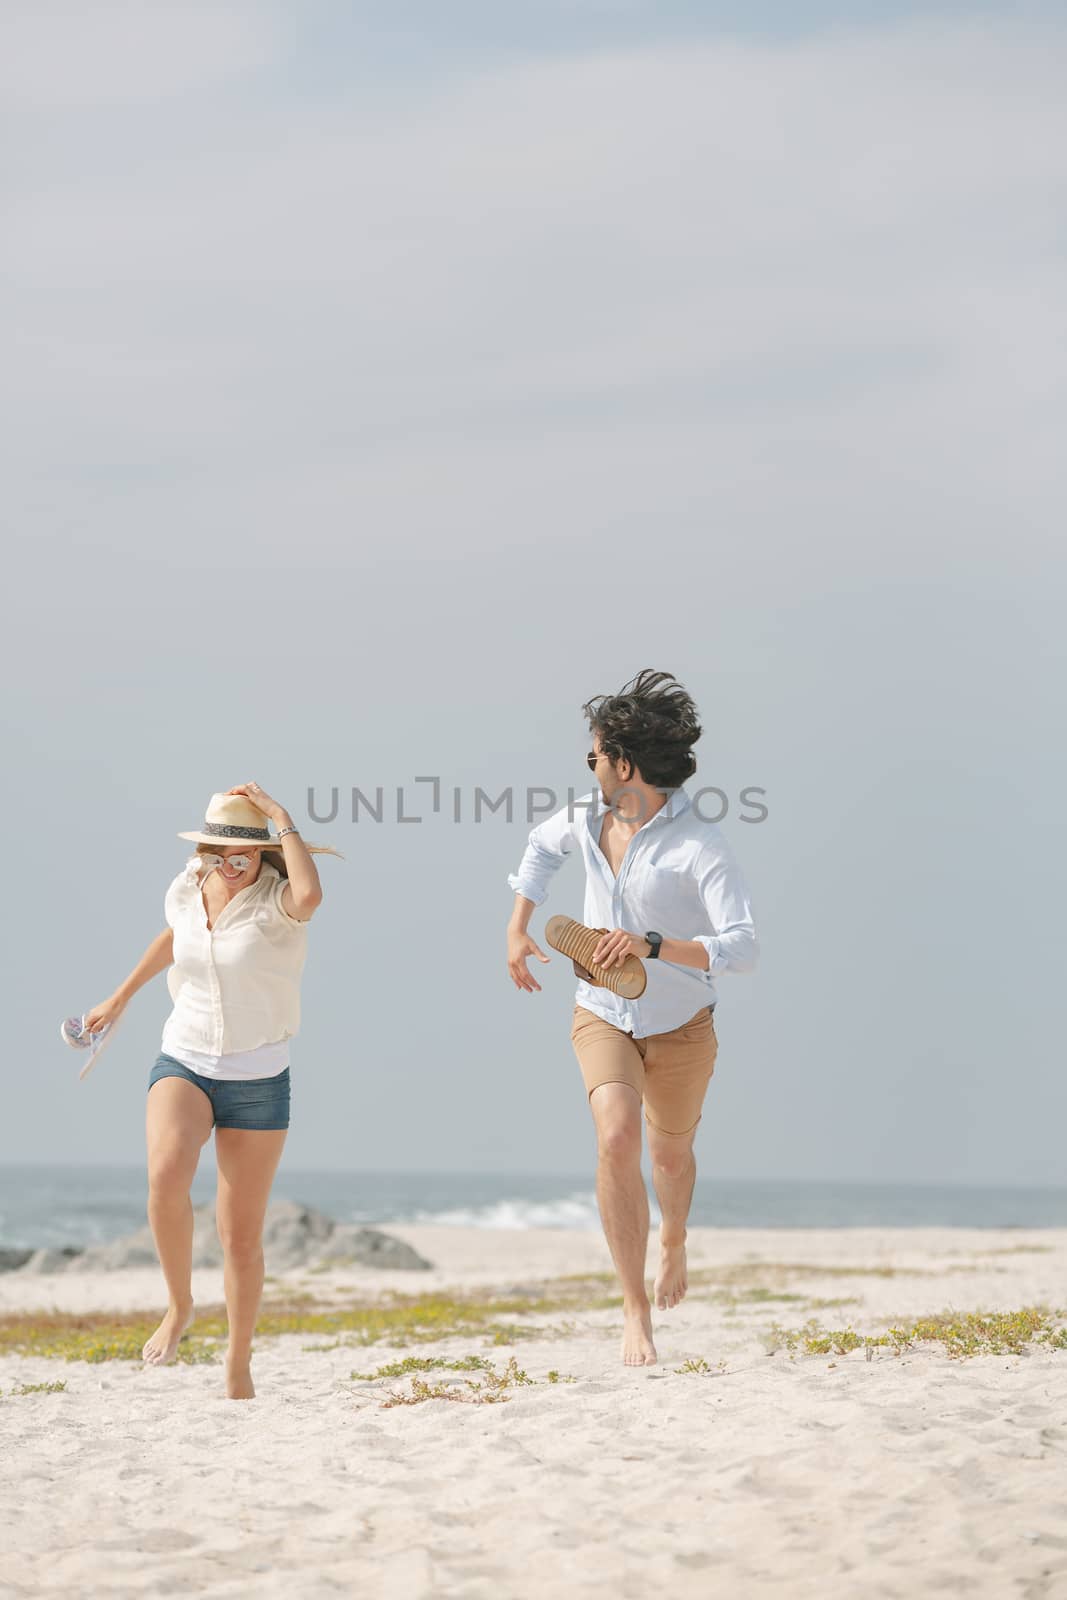 Front view of happy young Caucasian couple running at beach on sunny day. They are smiling